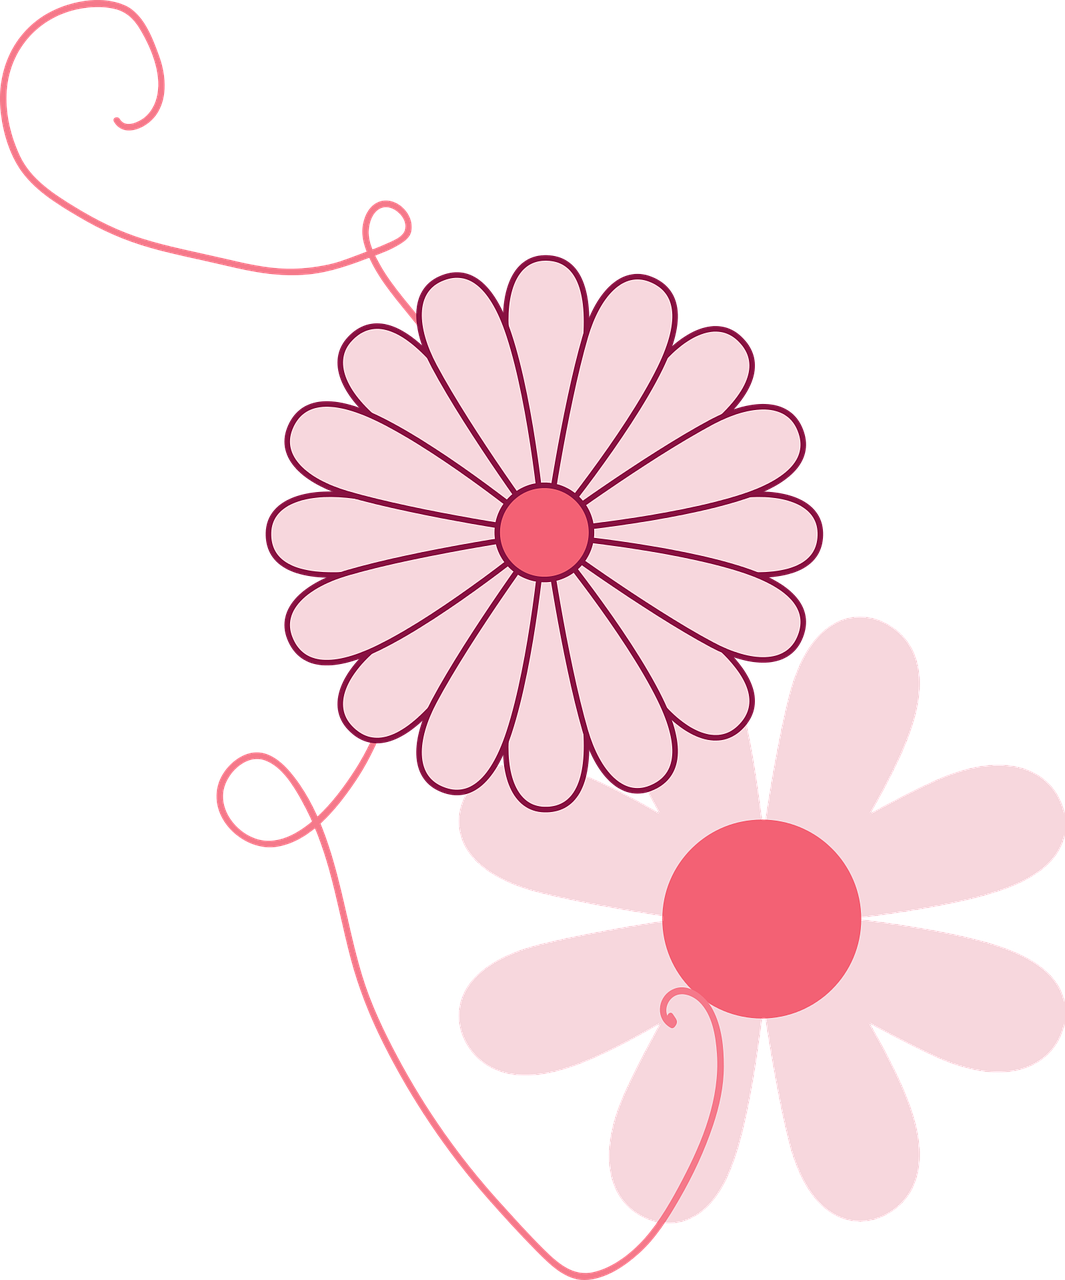 Flowers Spring Ornament Girly PNG.